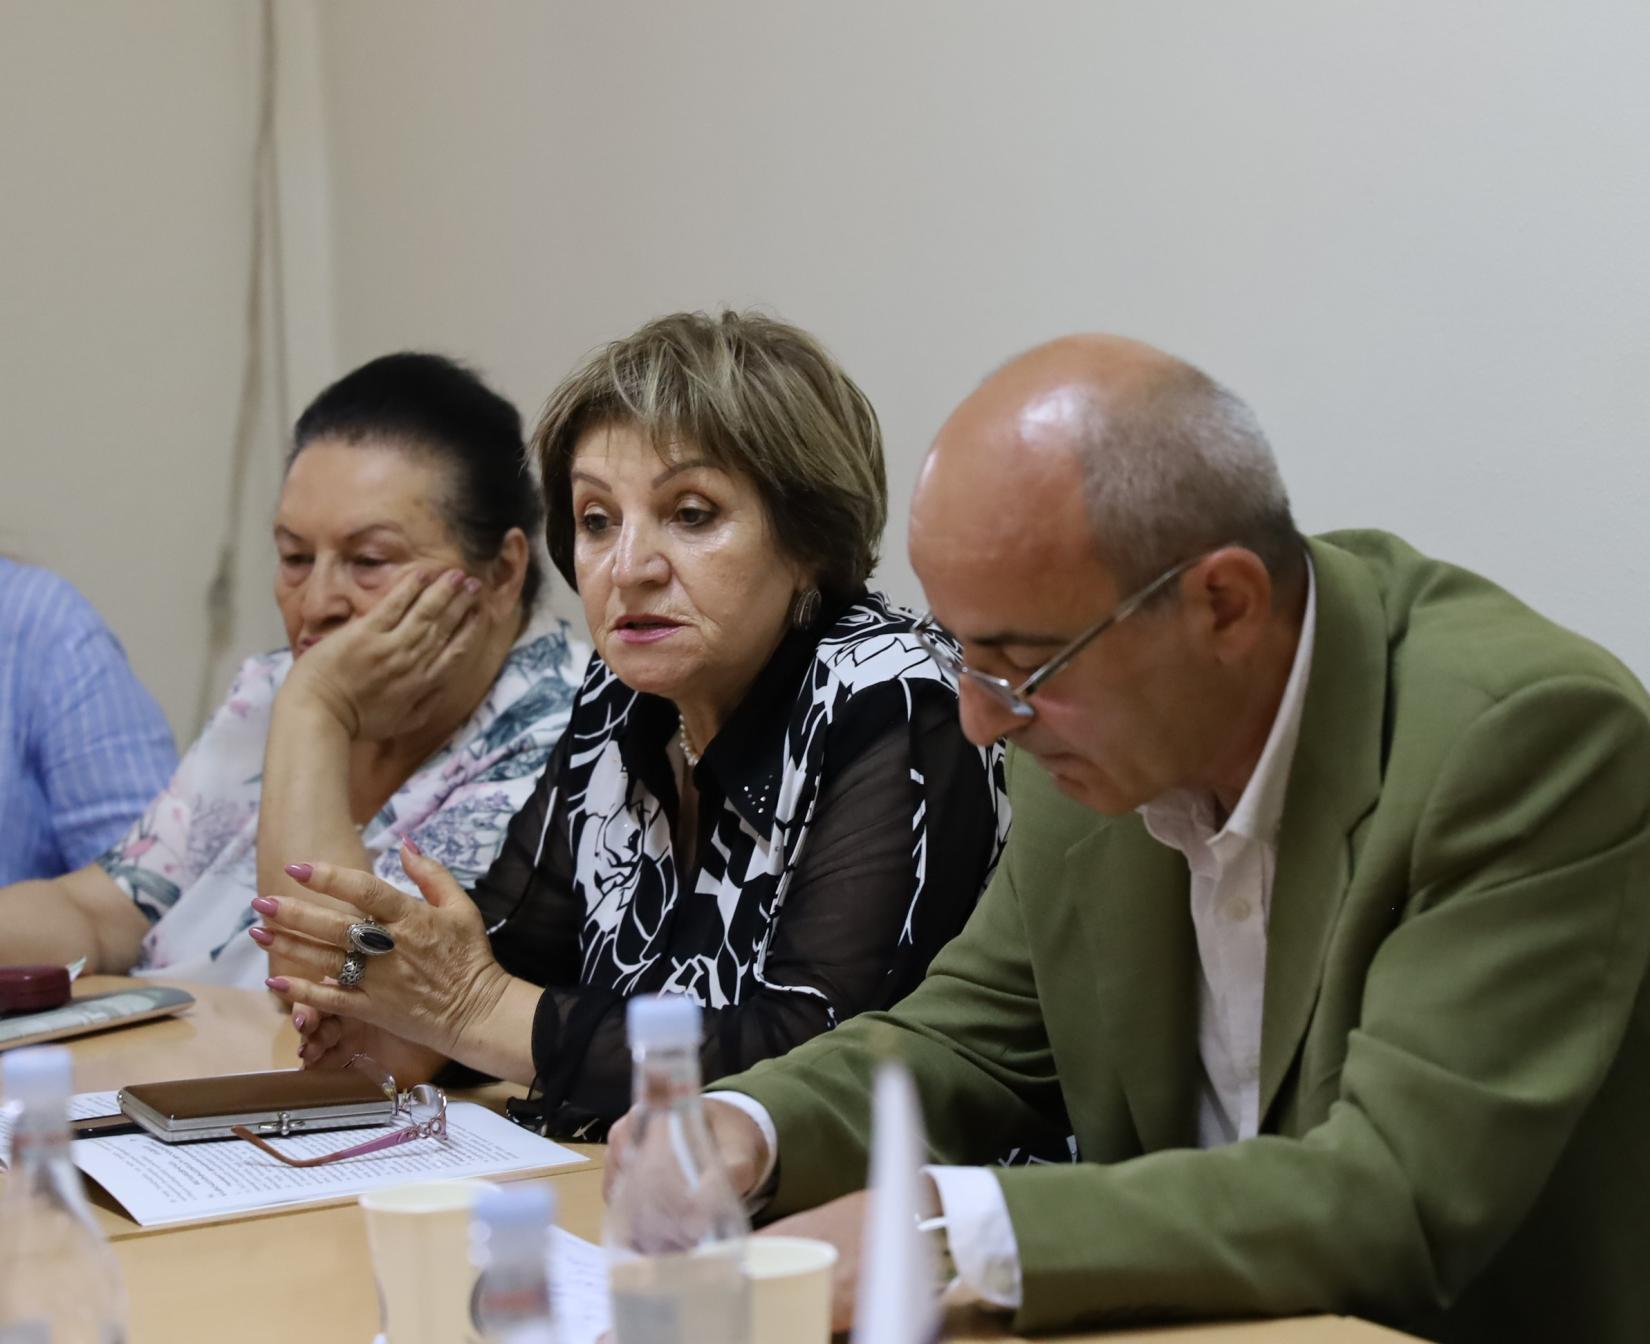 Three adults (two women and a man) during the meeting in Kapan.